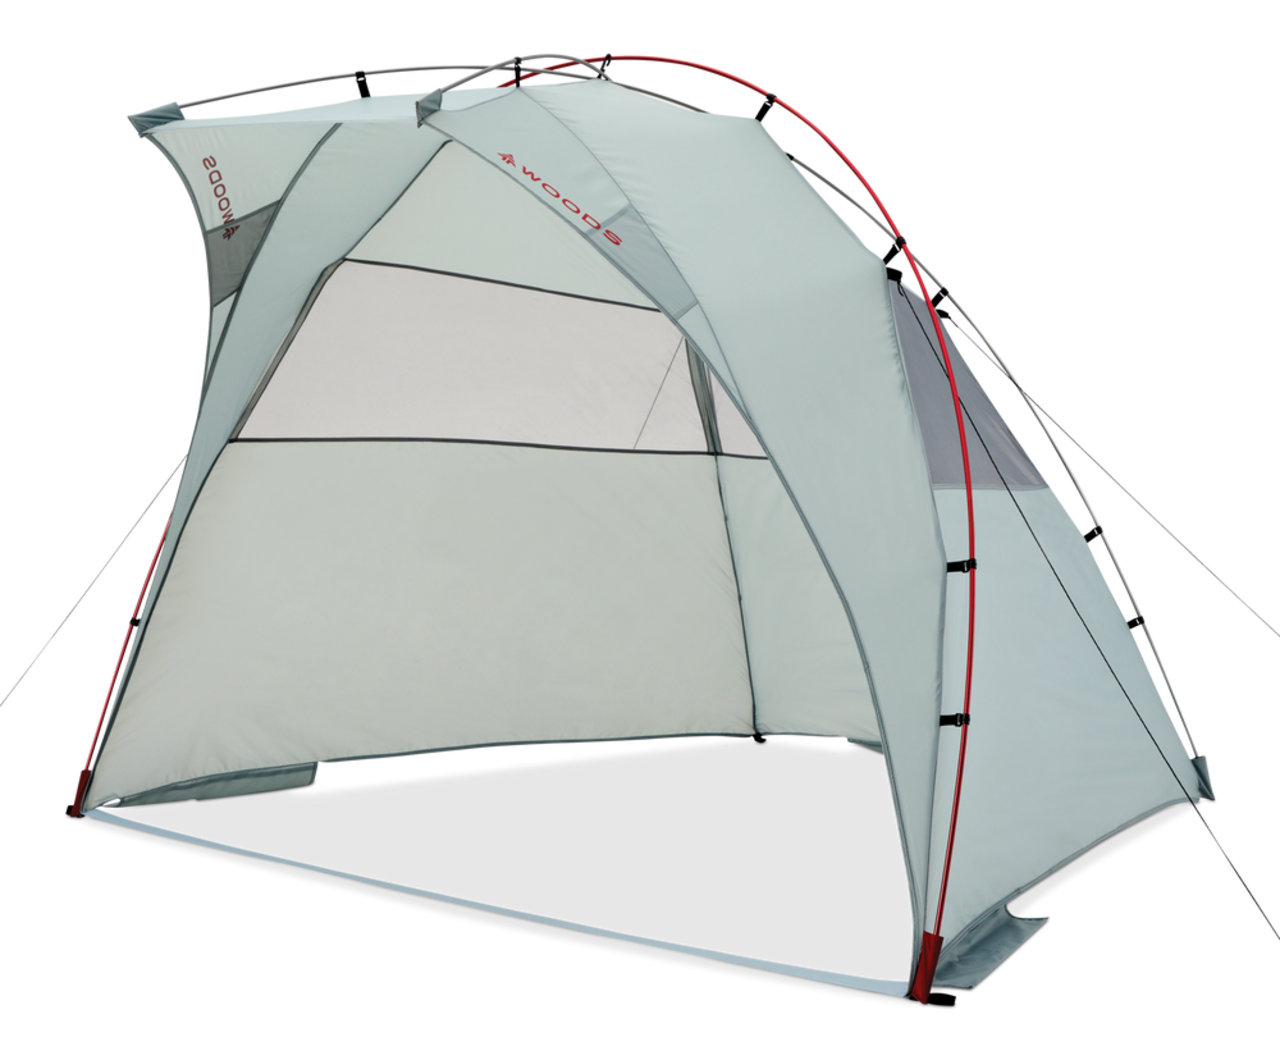 https://media-www.canadiantire.ca/product/playing/camping/tents-shelters/0766447/woods-hideout-shelter-a3fbe543-5261-4912-966b-316418a98b6b.png?imdensity=1&imwidth=640&impolicy=mZoom